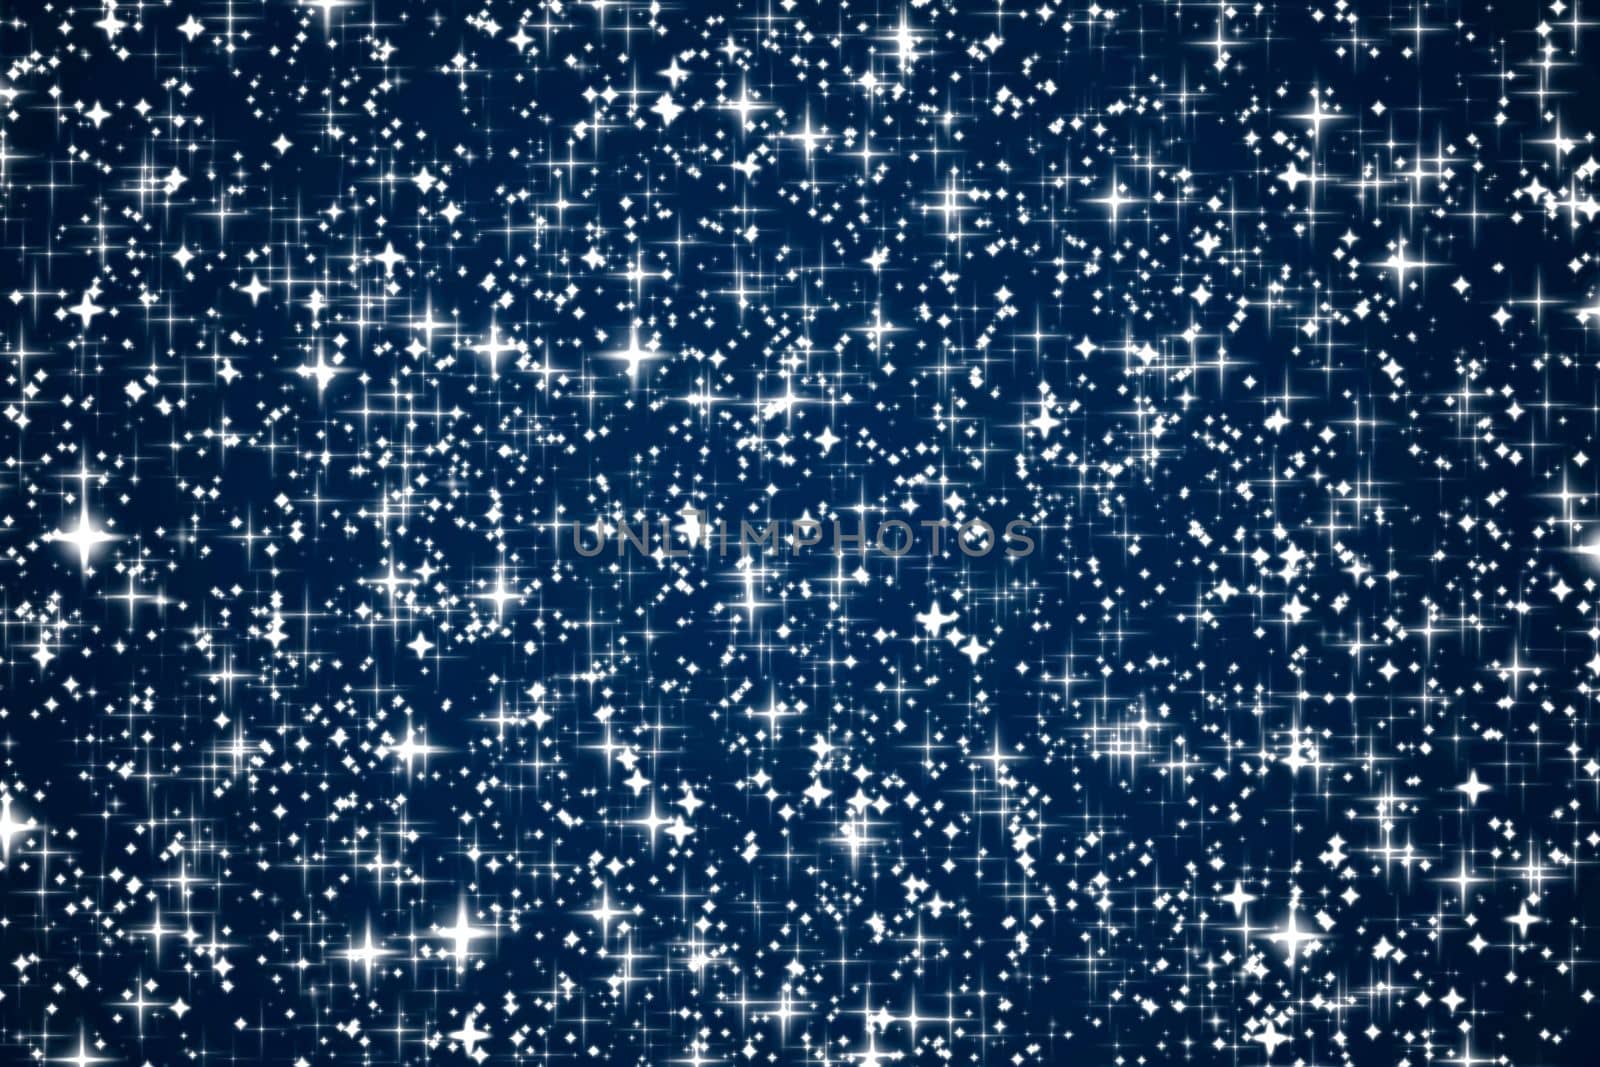 Magic, luxury and happy holidays background, silver sparkling glitter, stars and magical glow on dark blue abstract texture, star dust particles as starry night space sky, glamour and holiday design